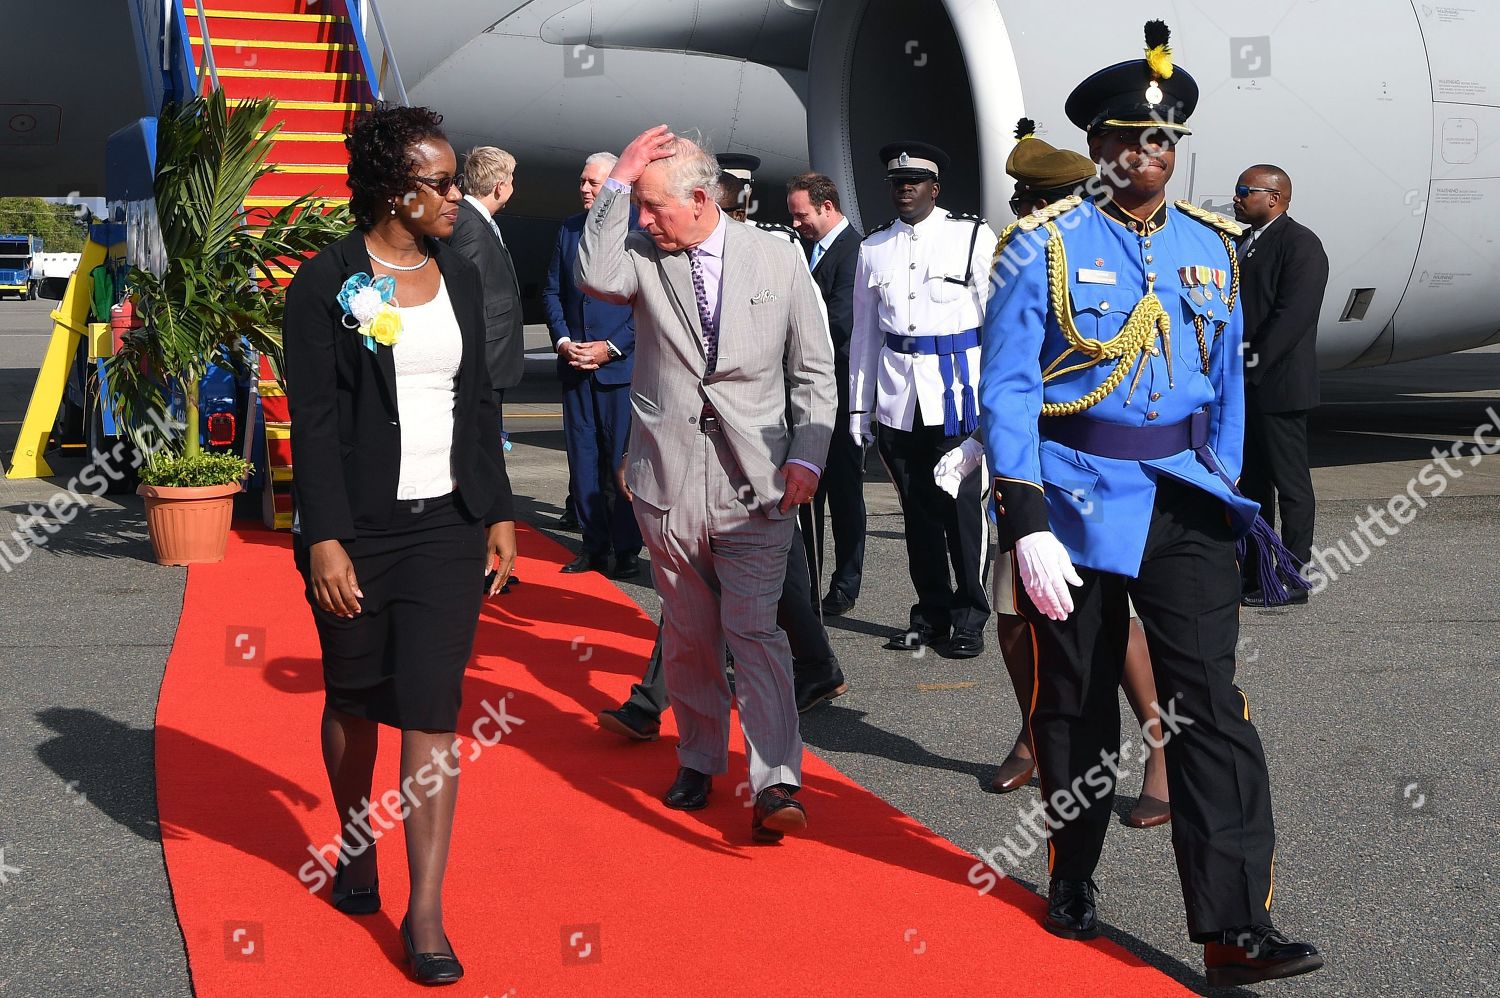 prince-charles-and-camilla-duchess-of-cornwall-caribbean-tour-st-lucia-shutterstock-editorial-10158713b.jpg